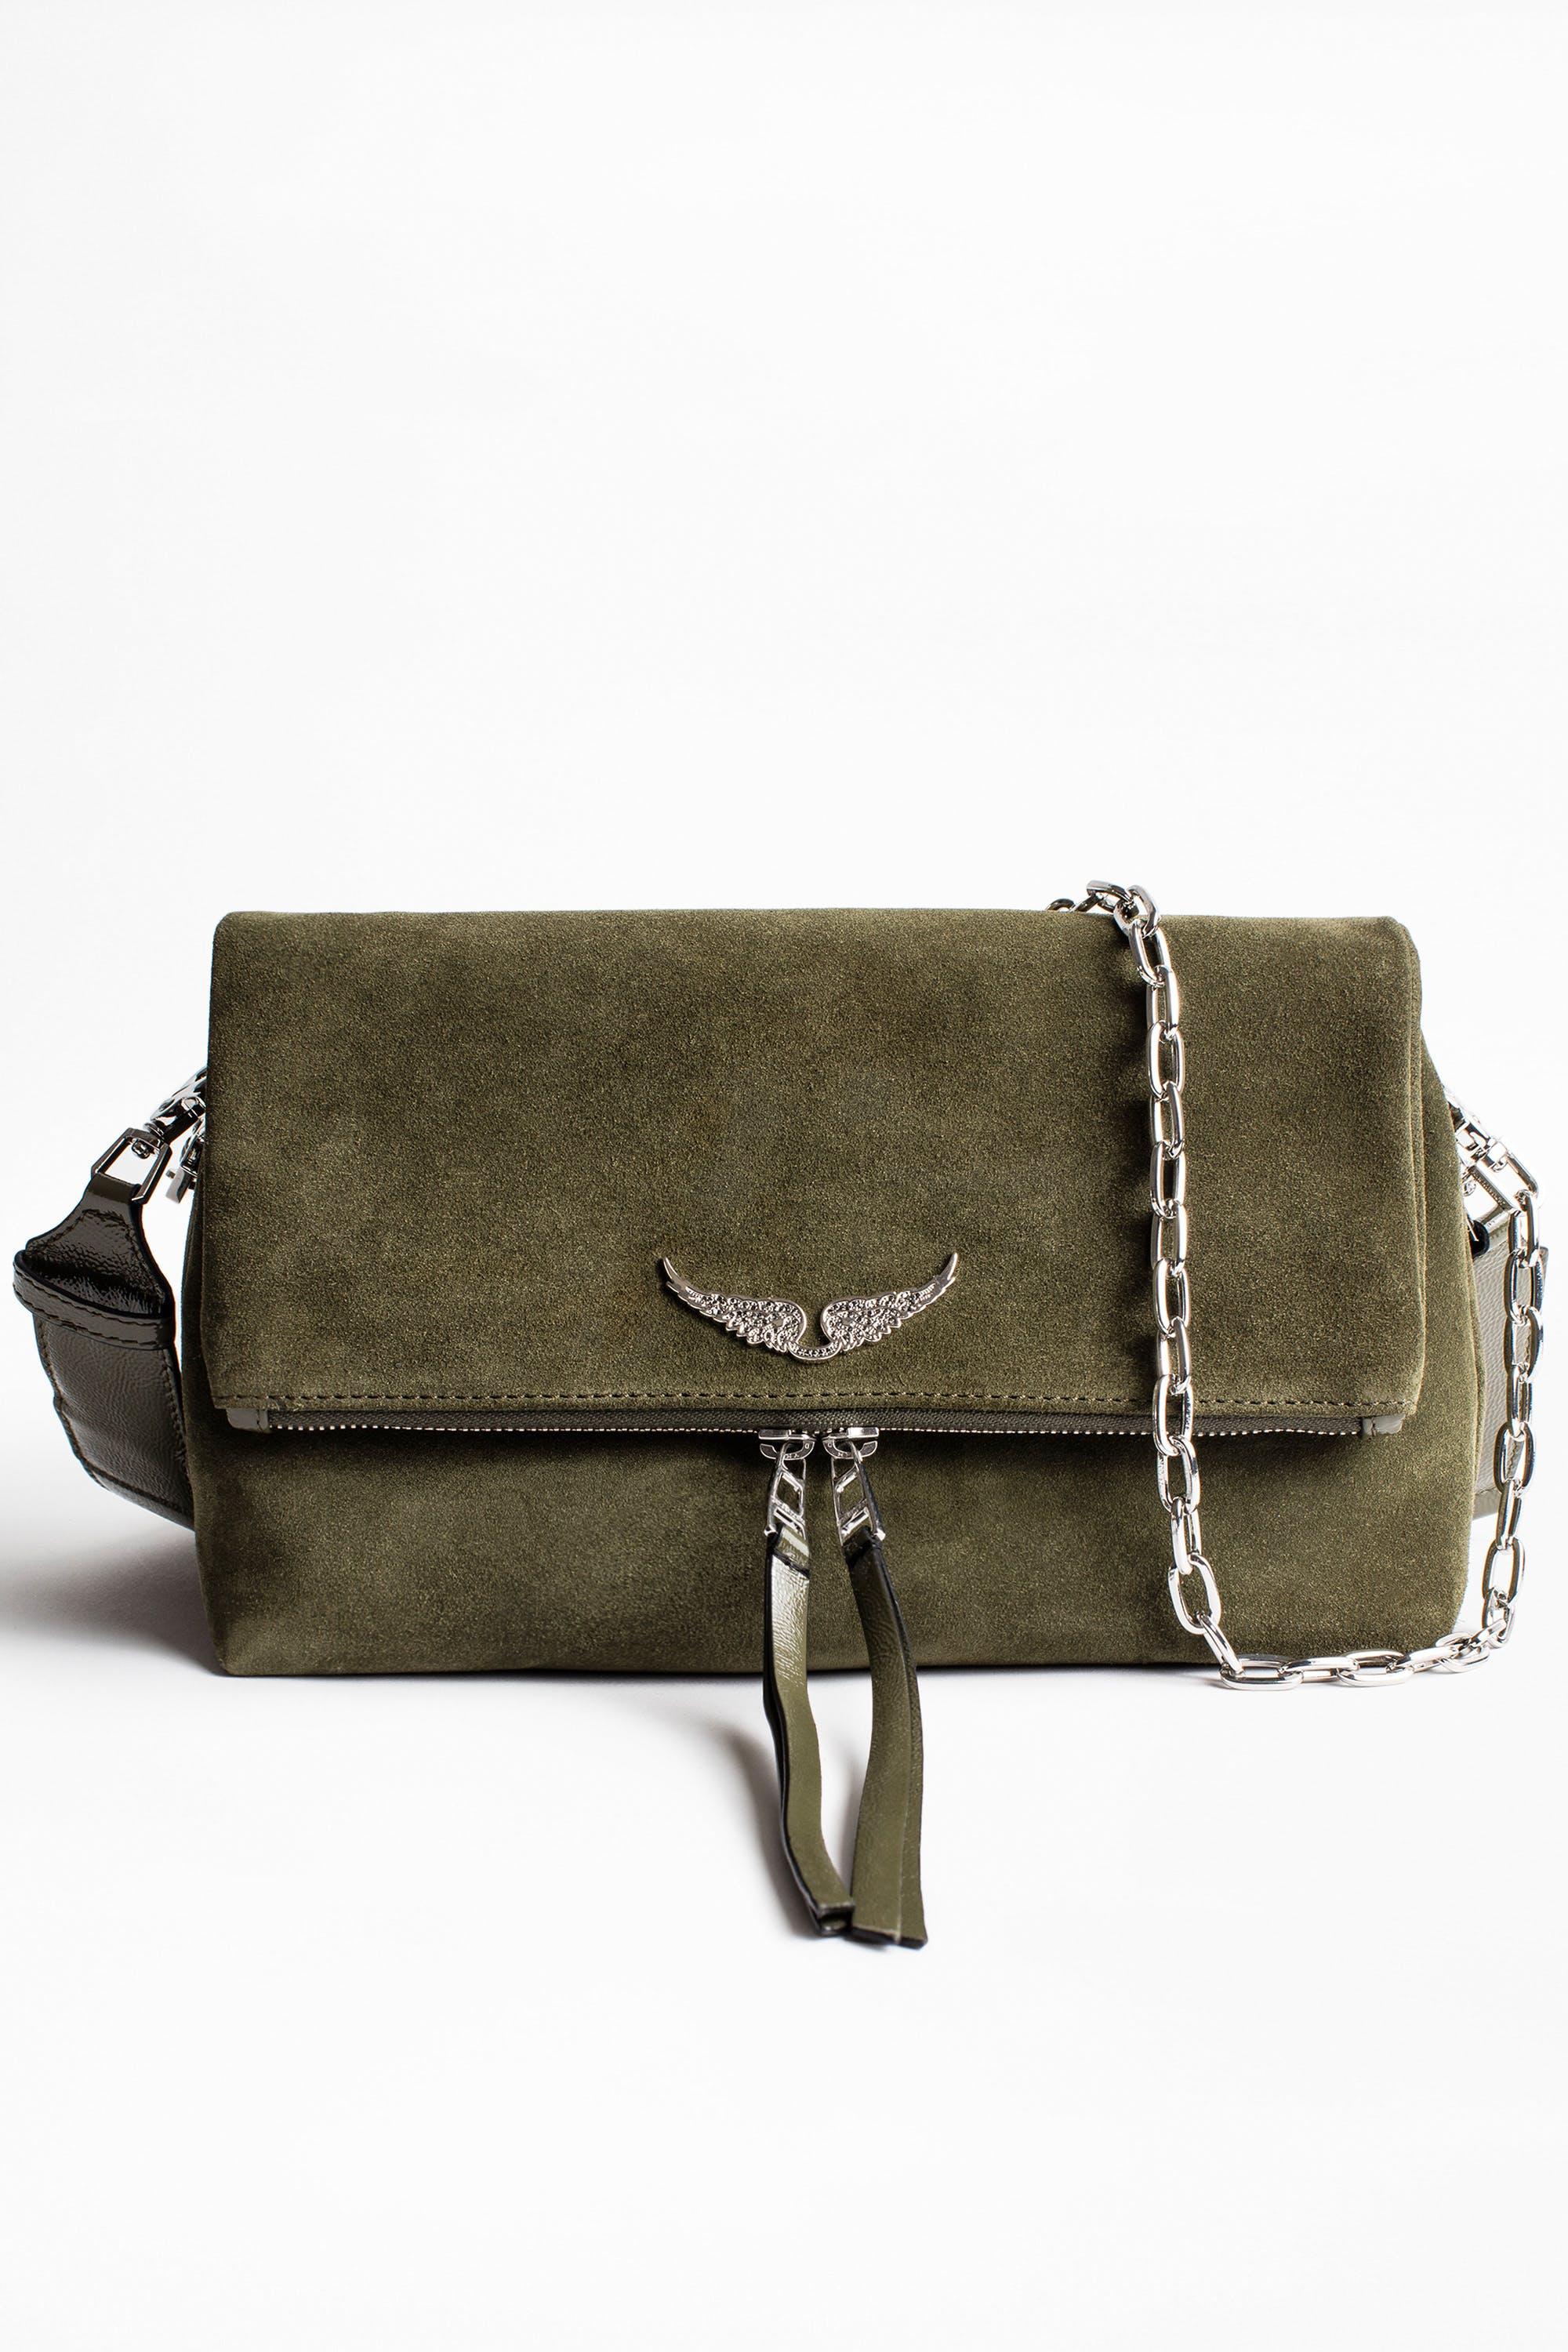 Zadig And Voltaire Bags U.K., SAVE 32% - online-pmo.com